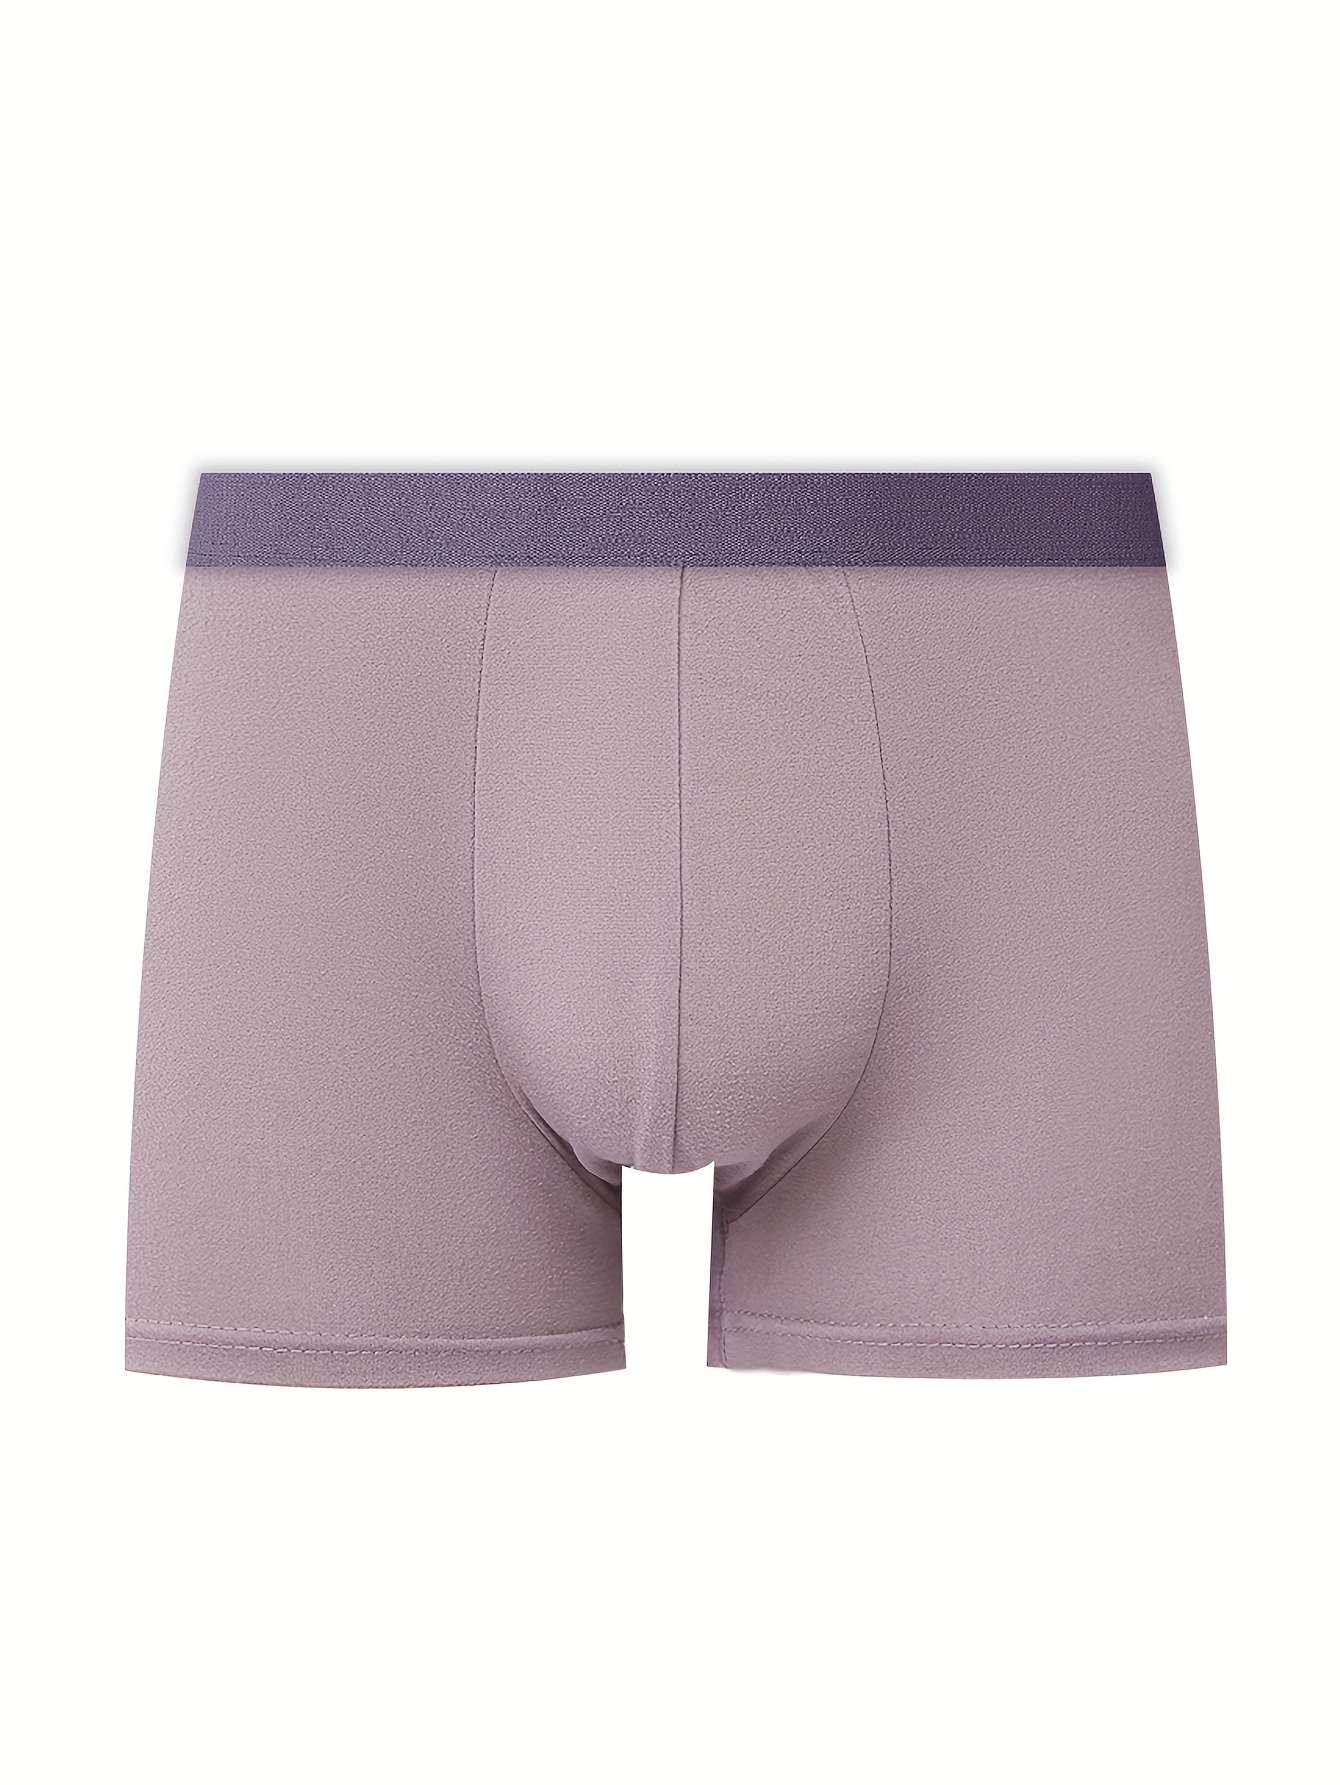 Girls Quick-Drying Cotton Underwear Antibacterial Crotch Sports